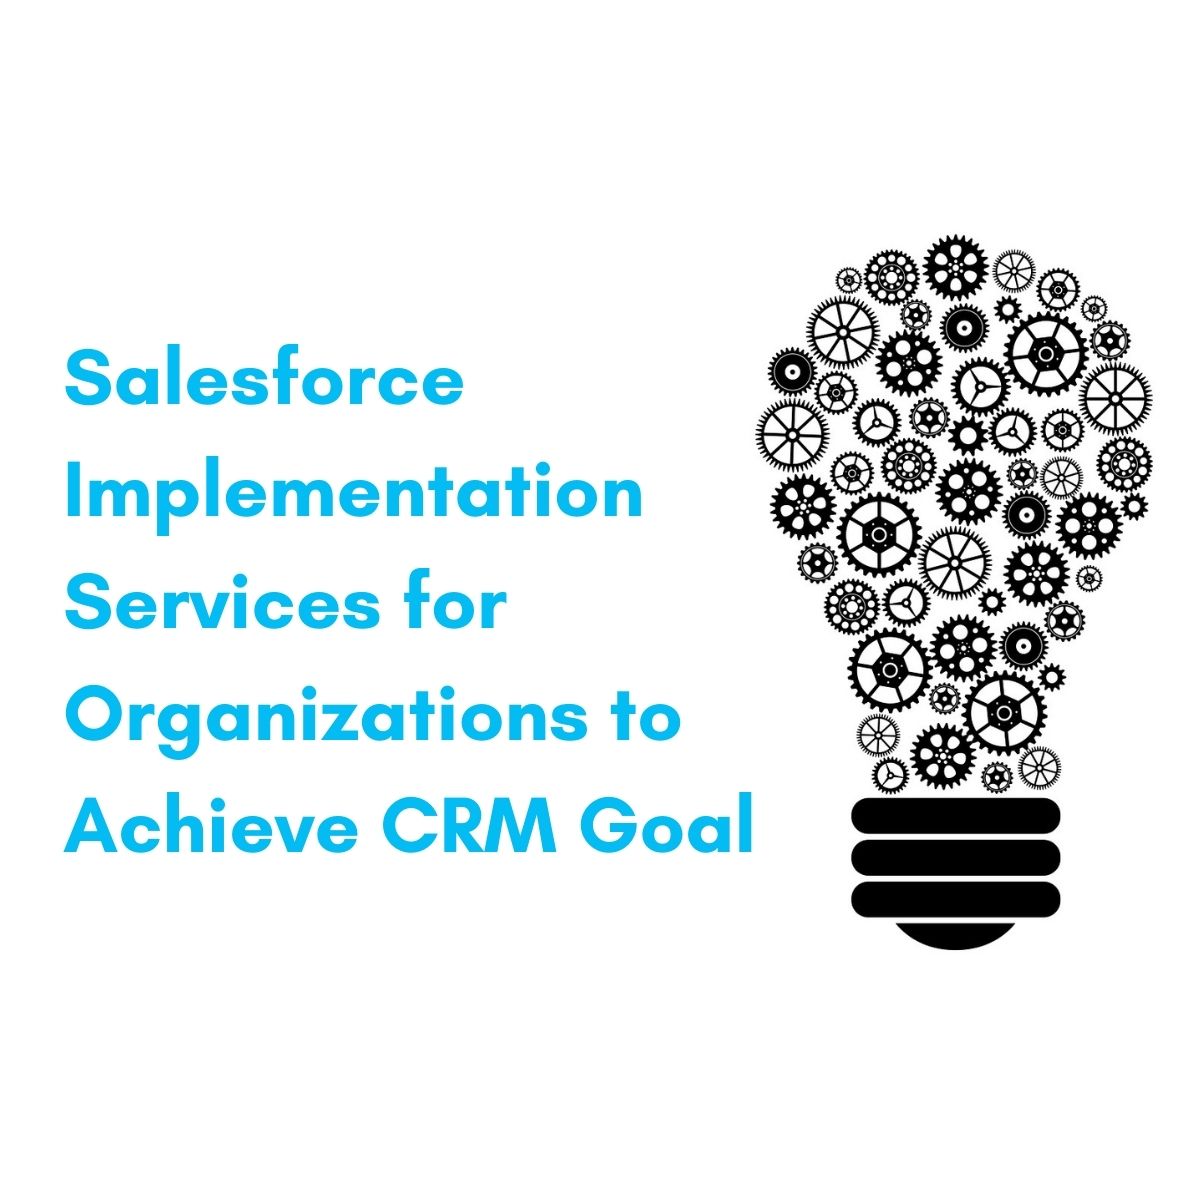 How does Salesforce implementation Services help organizations to achieve CRM Goal?